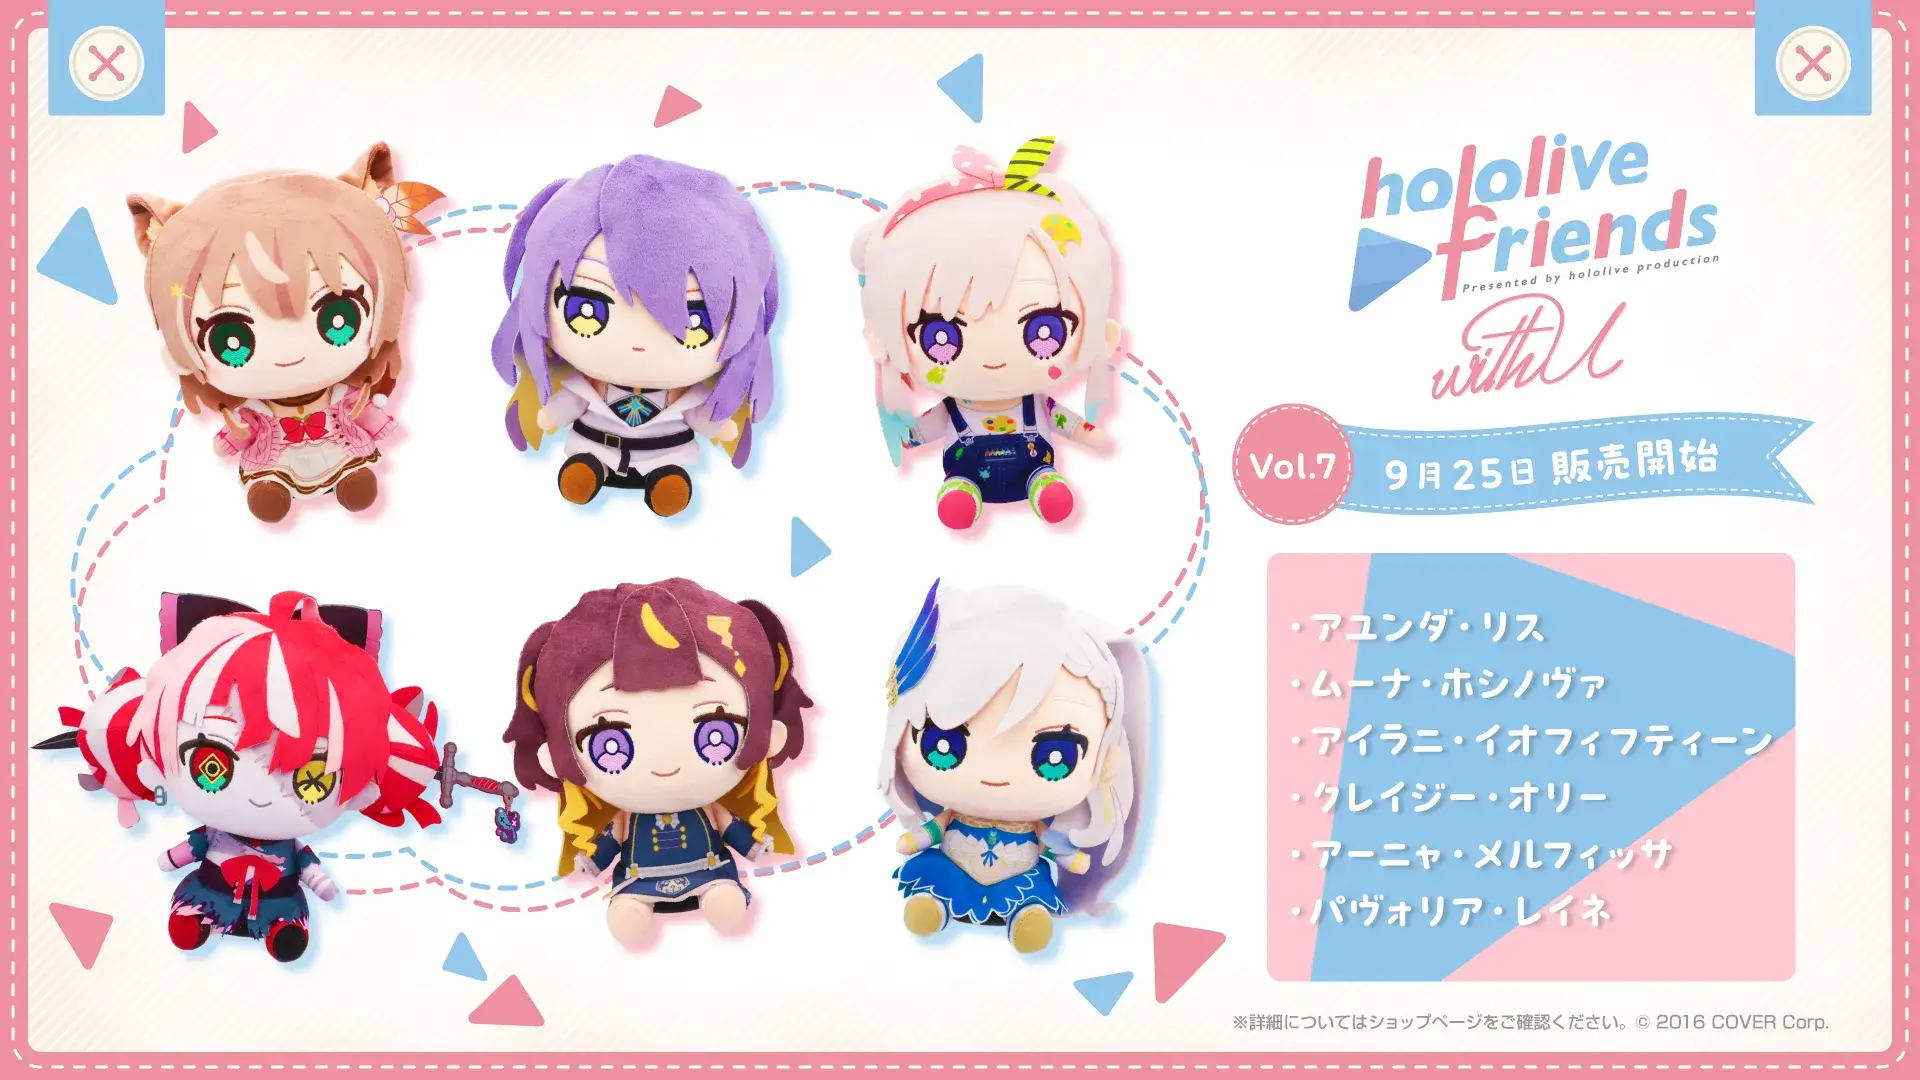 『hololive friends with u vol.7』が発売されました